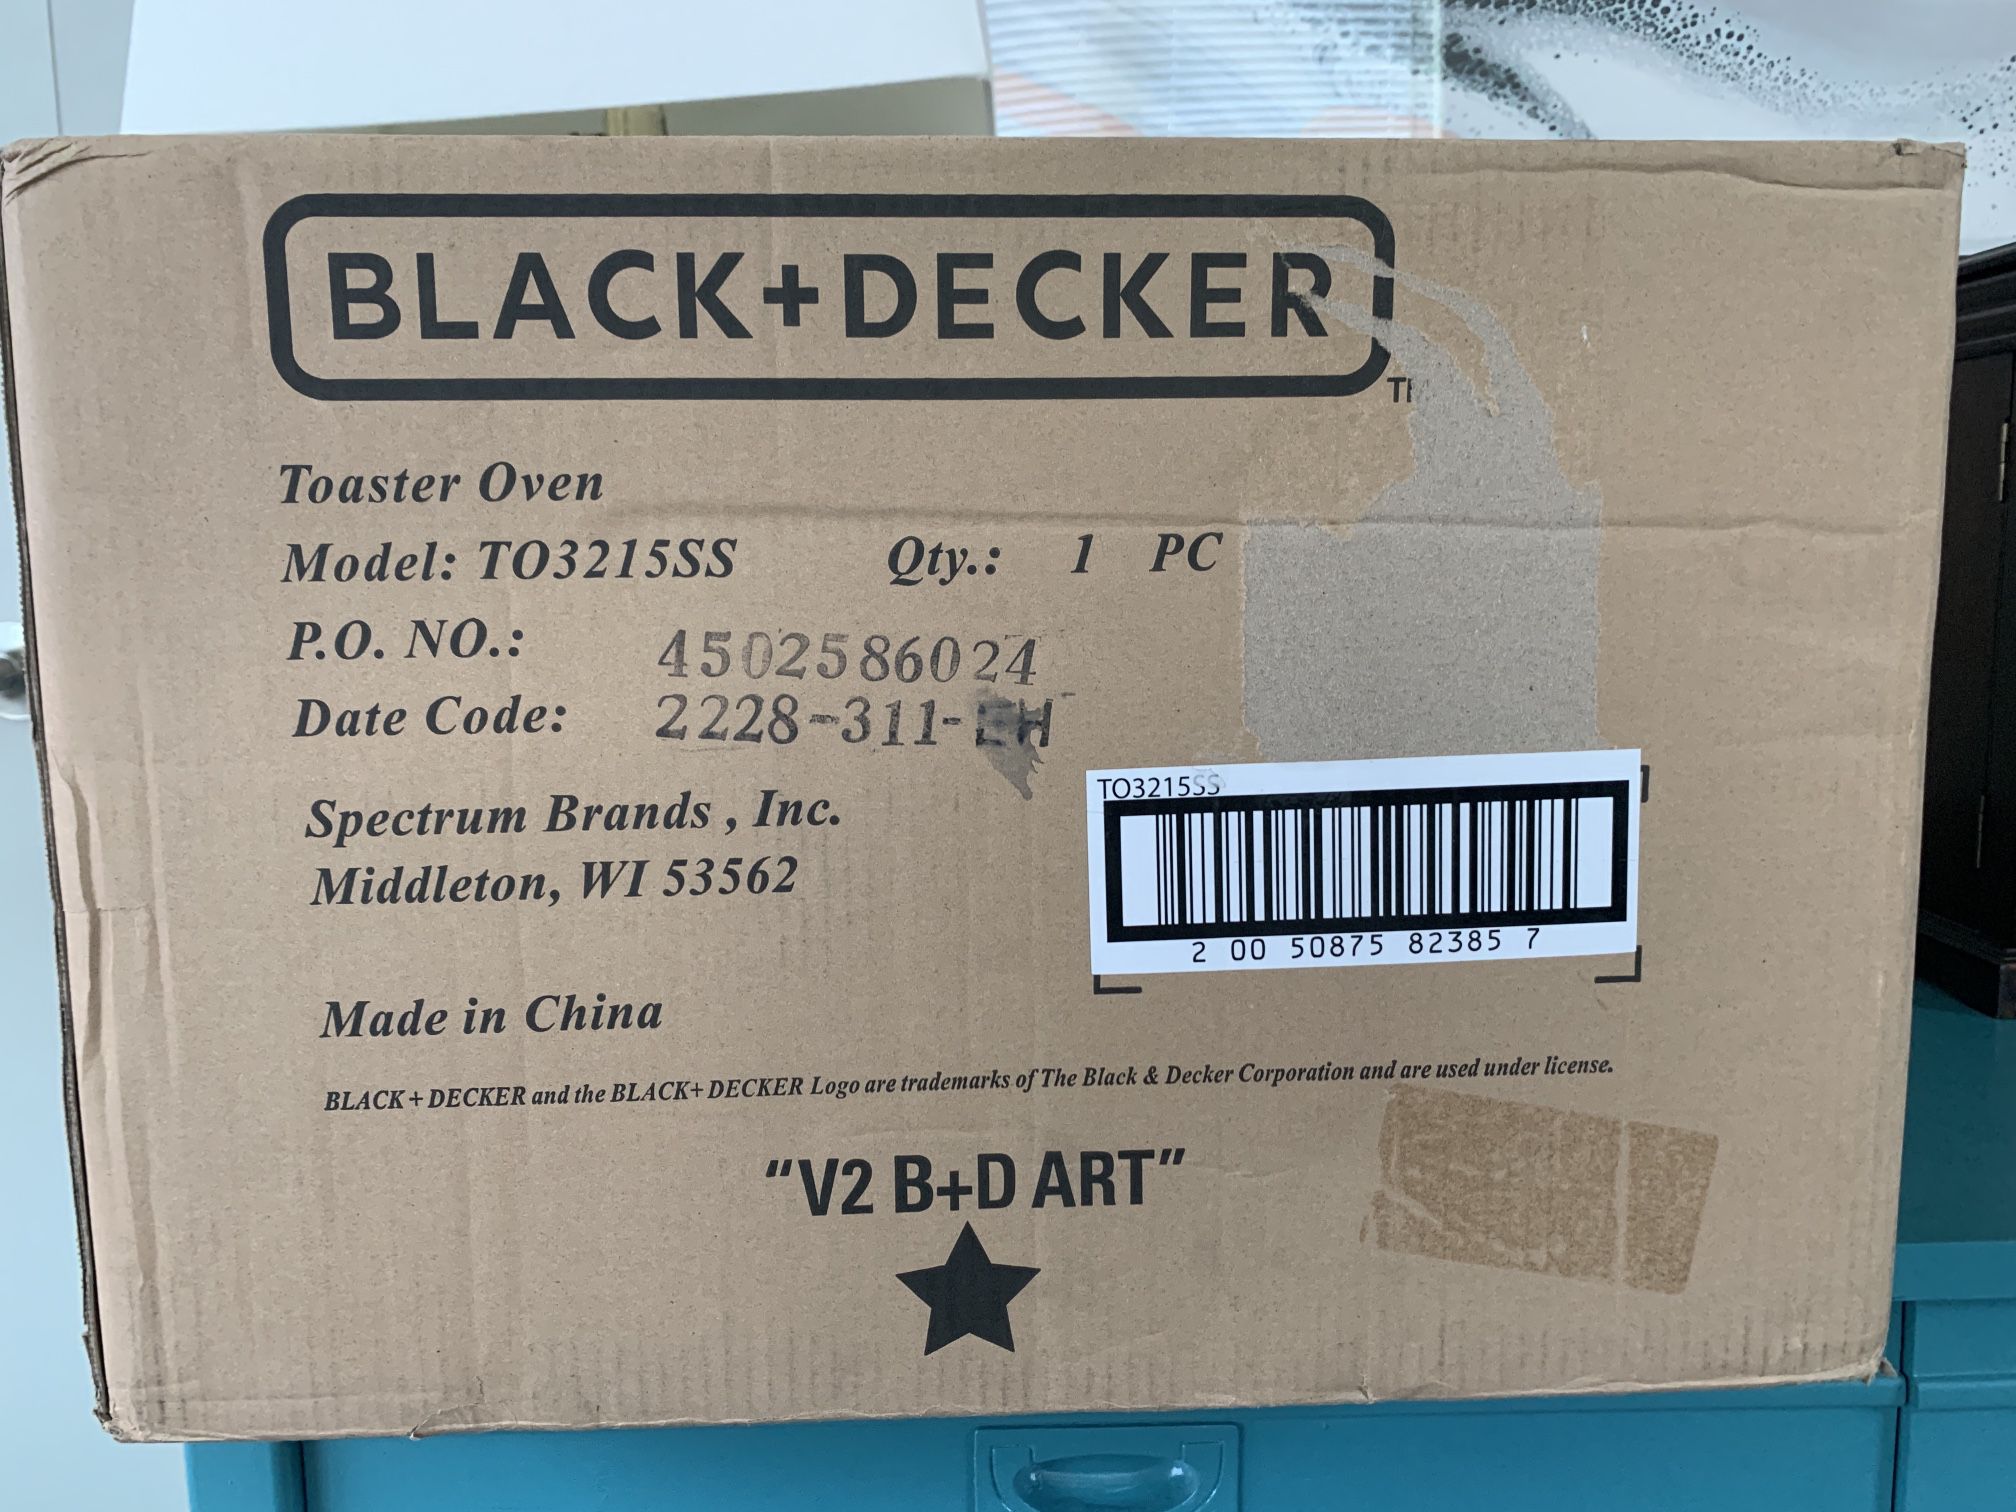 NEW Black + Decker Toaster Oven w/ Air Fryer for Sale in Houston